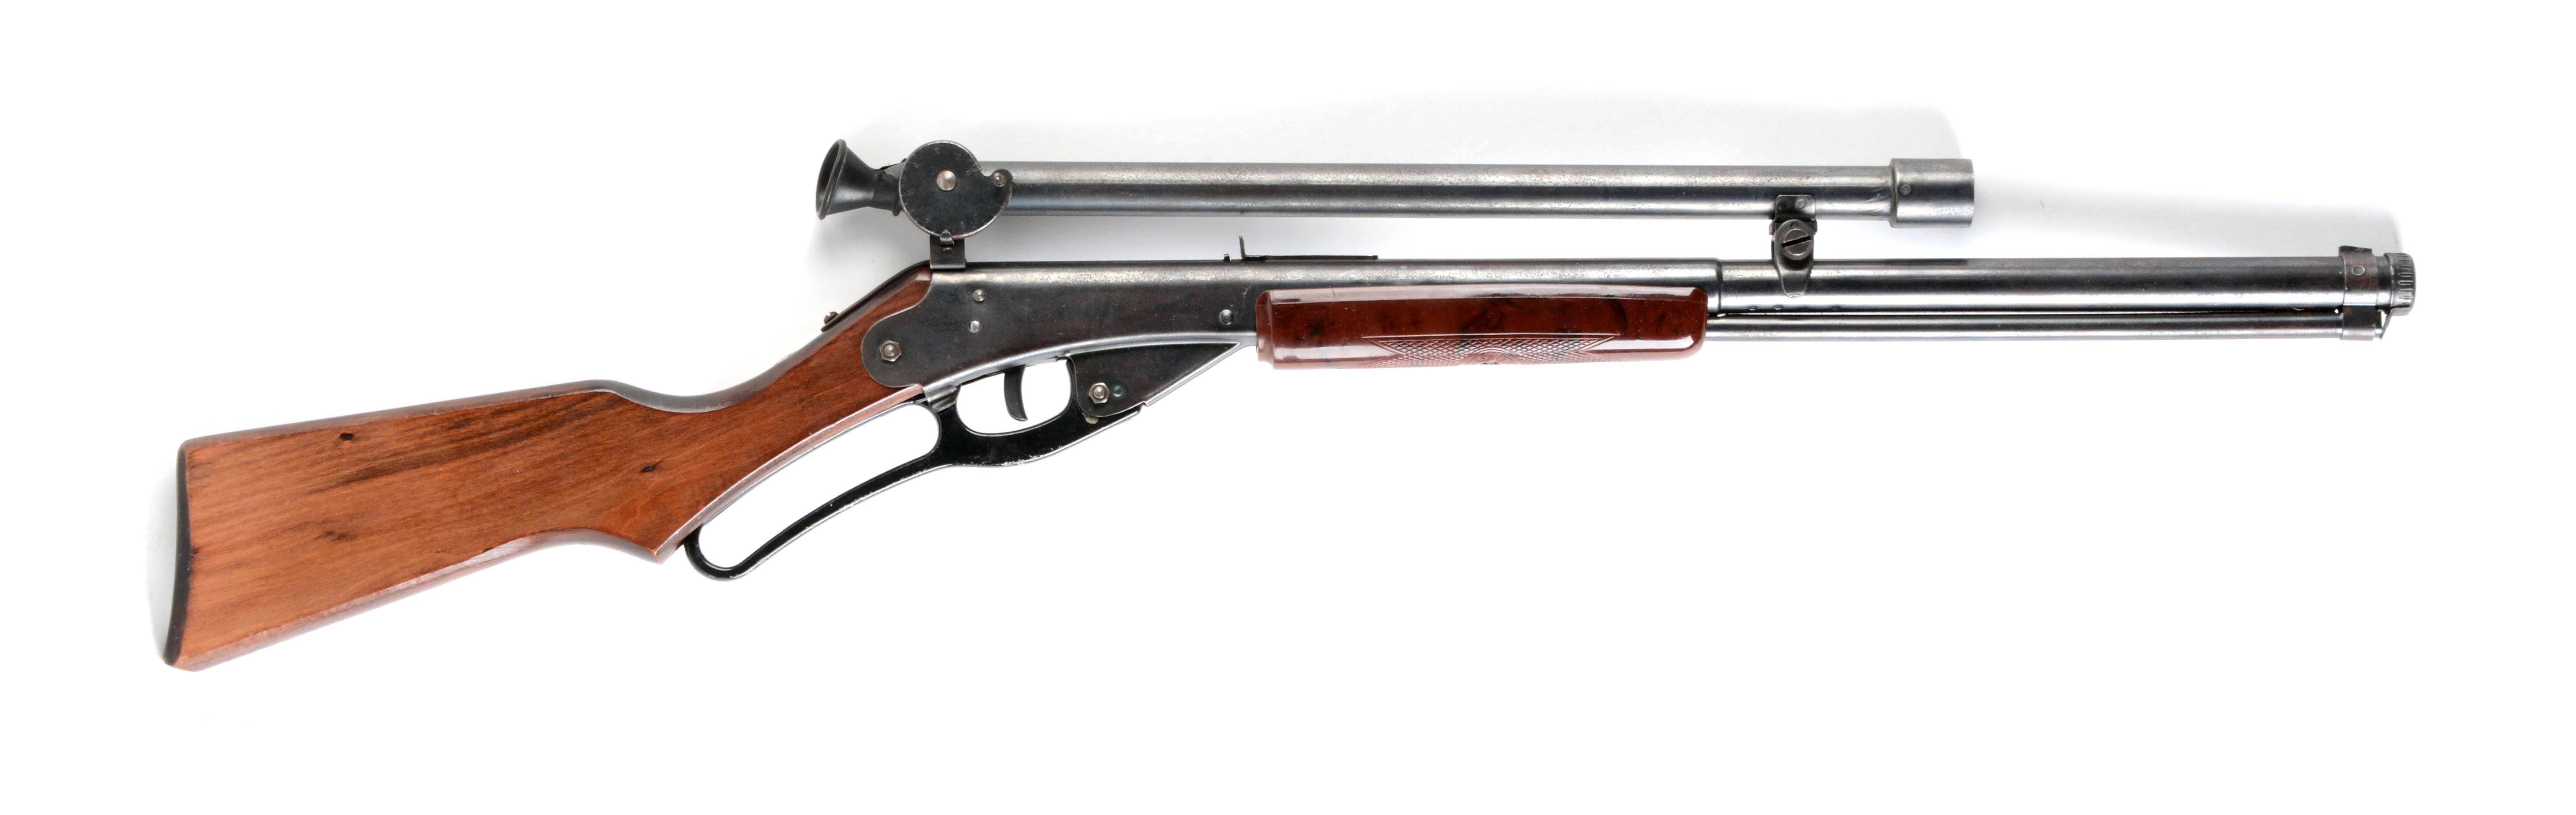 Daisy Red Ryder Carbine No 111 Model 40 with Scope. 